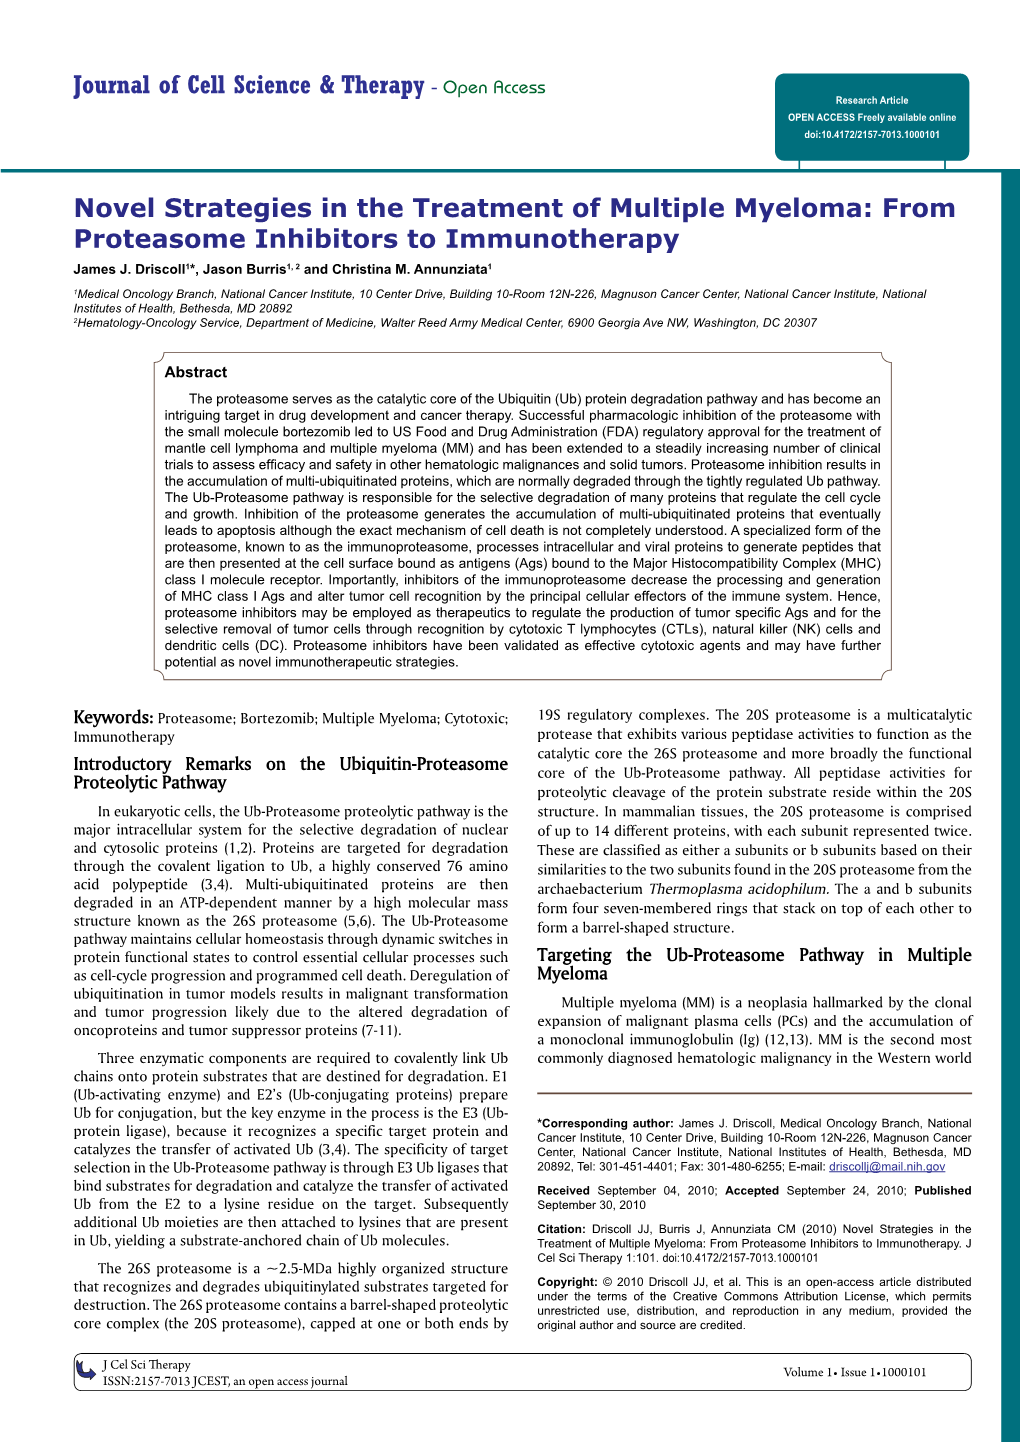 From Proteasome Inhibitors to Immunotherapy James J